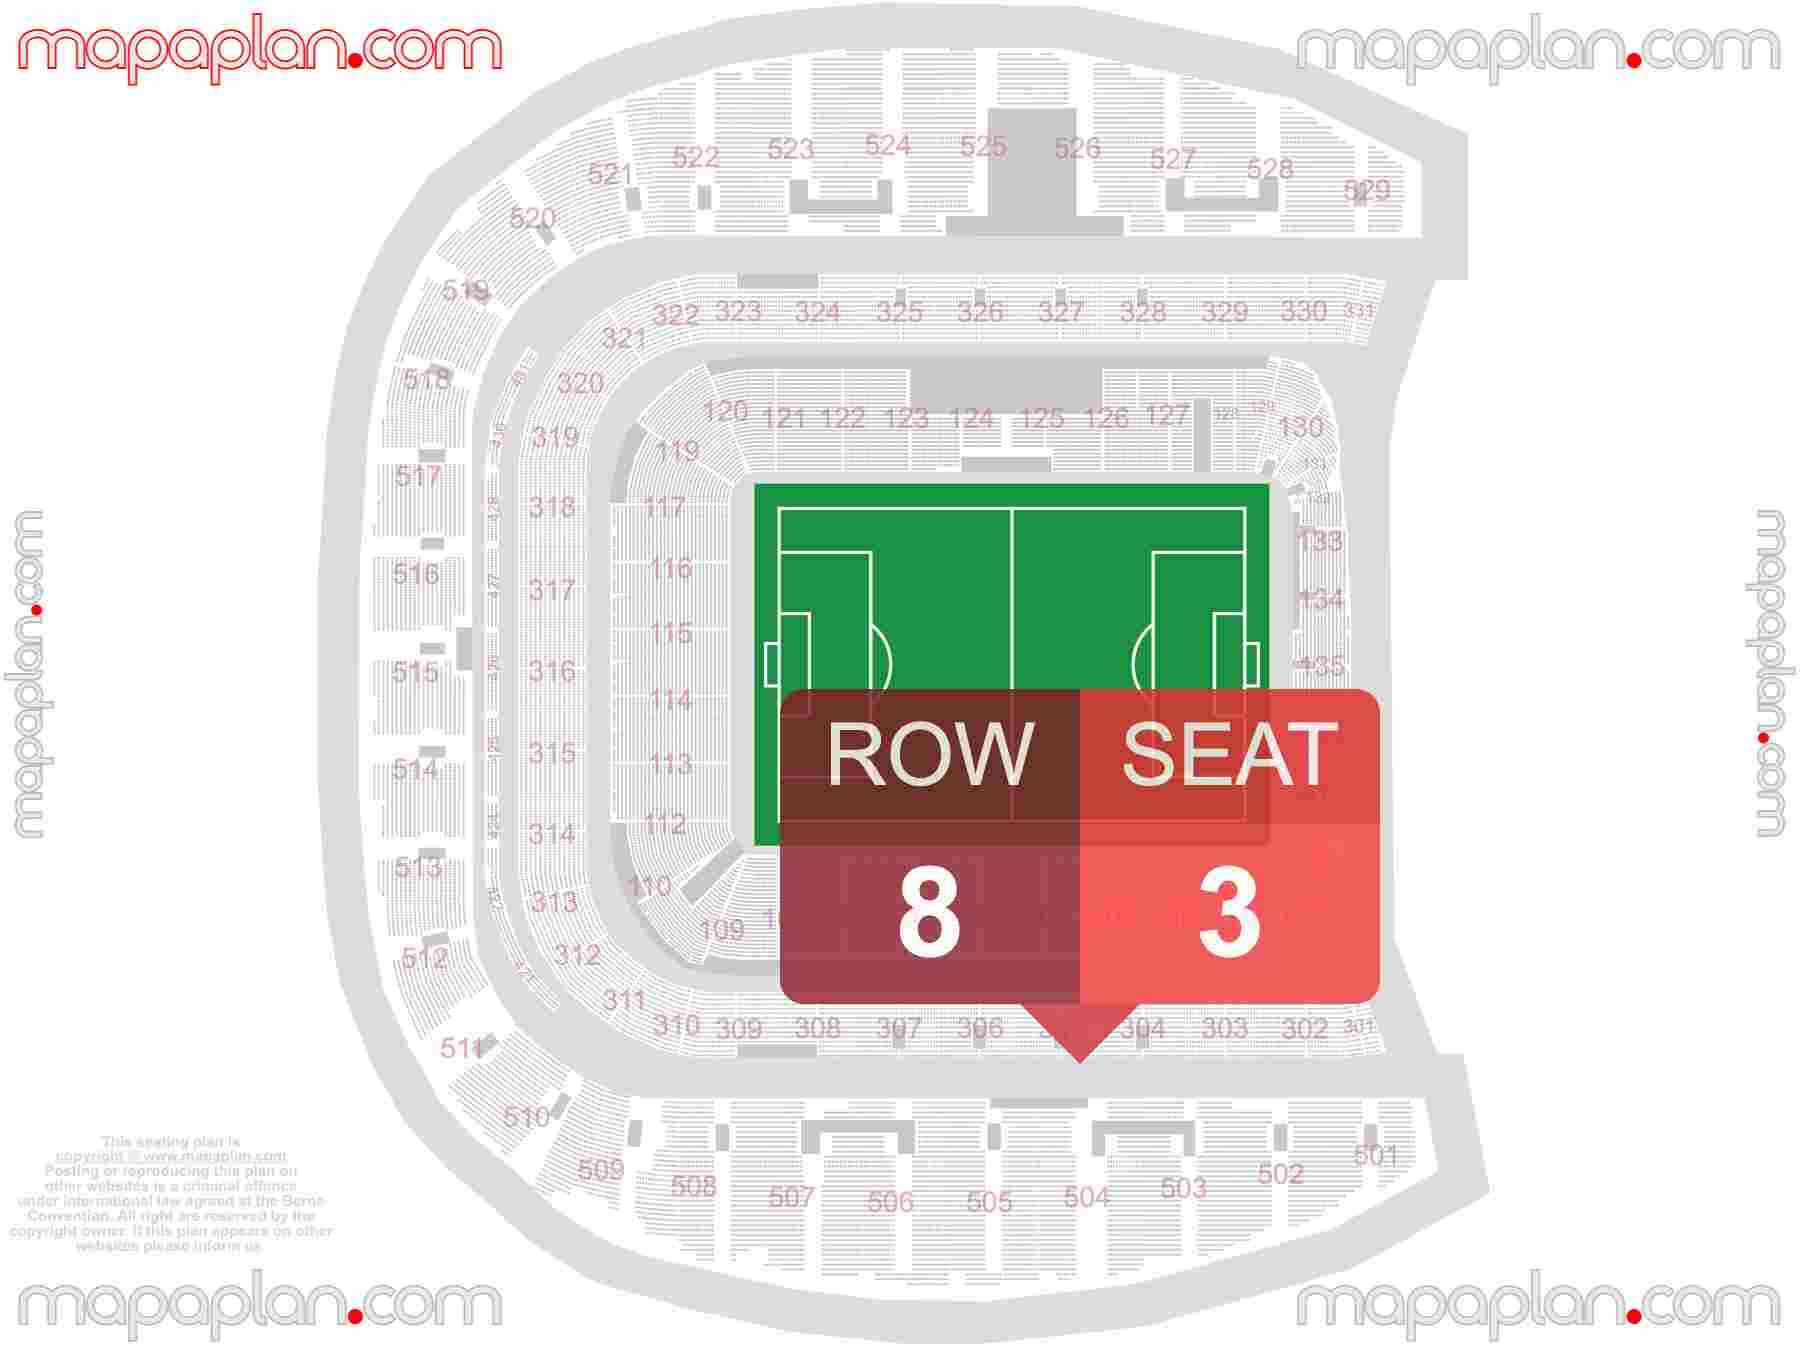 Dublin Aviva Stadium seating plan Football detailed seat numbers and row numbering plan with interactive map map layout